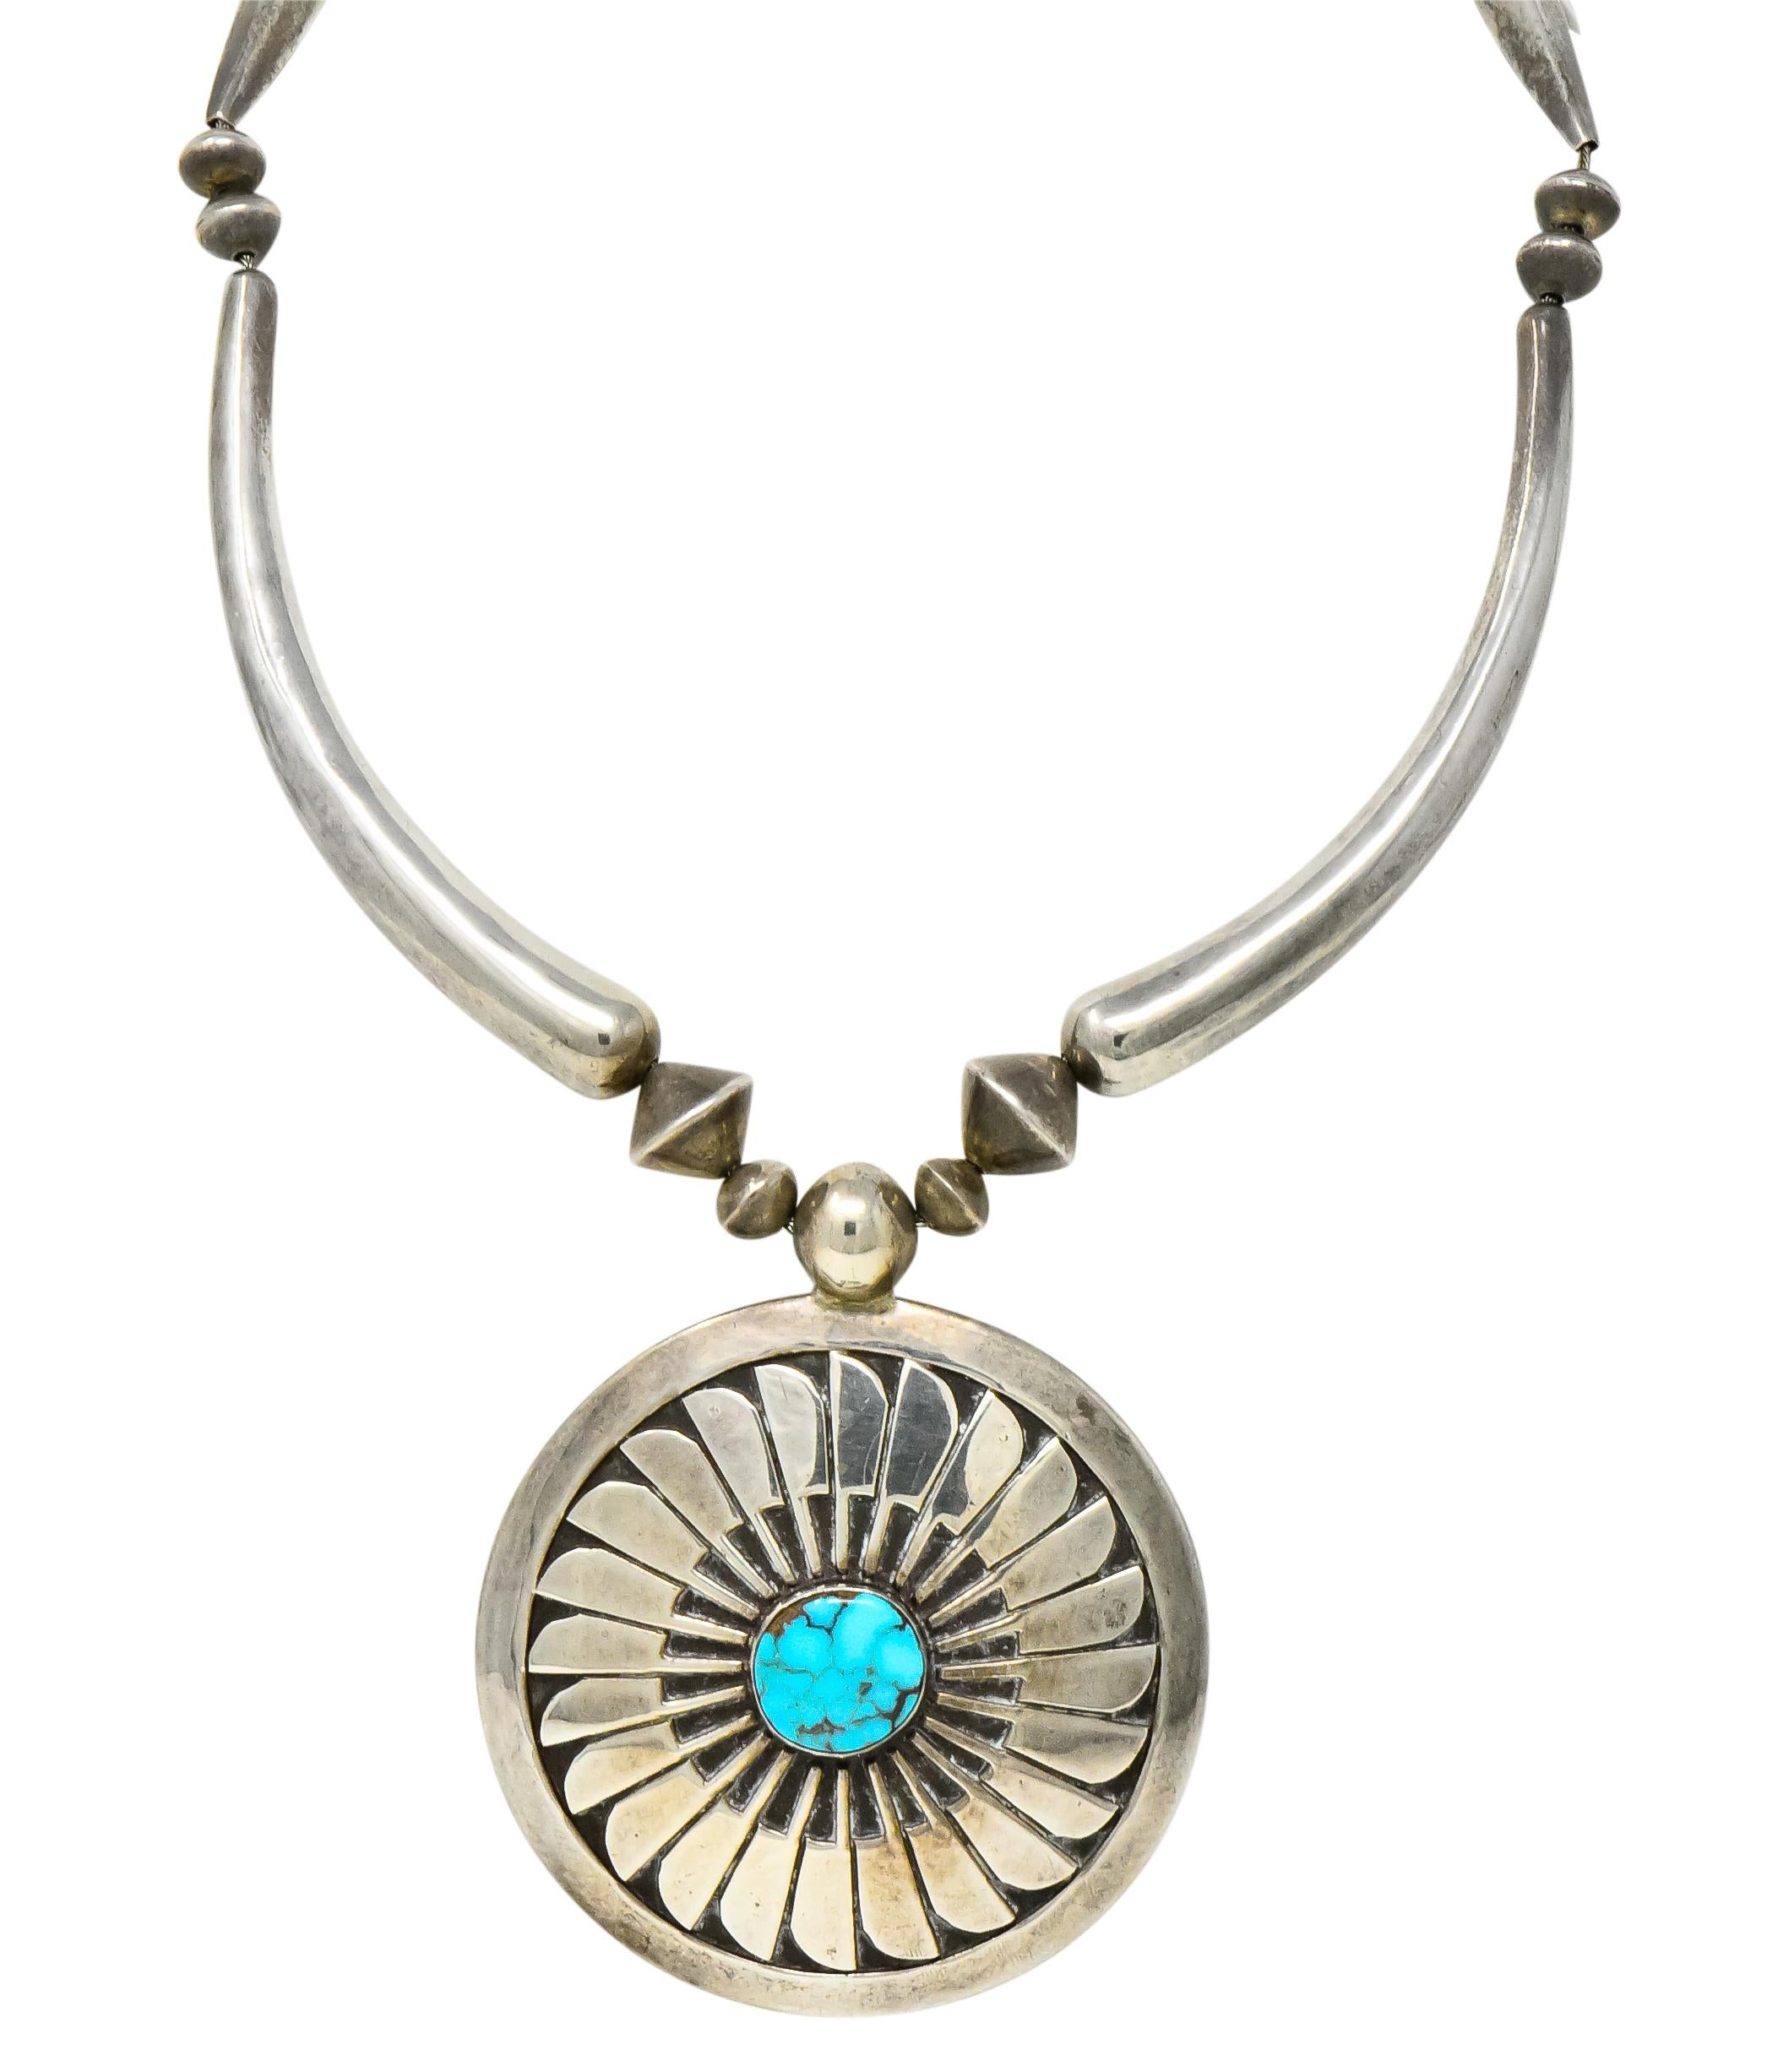 Featuring a large sterling silver disk with center turquoise stone containing natural dark matrix

Stylized overlay designs with purposeful black oxidation

Elongated curved beads and smaller beads accent chain

Hook closure

Signed JHQ for Joseph